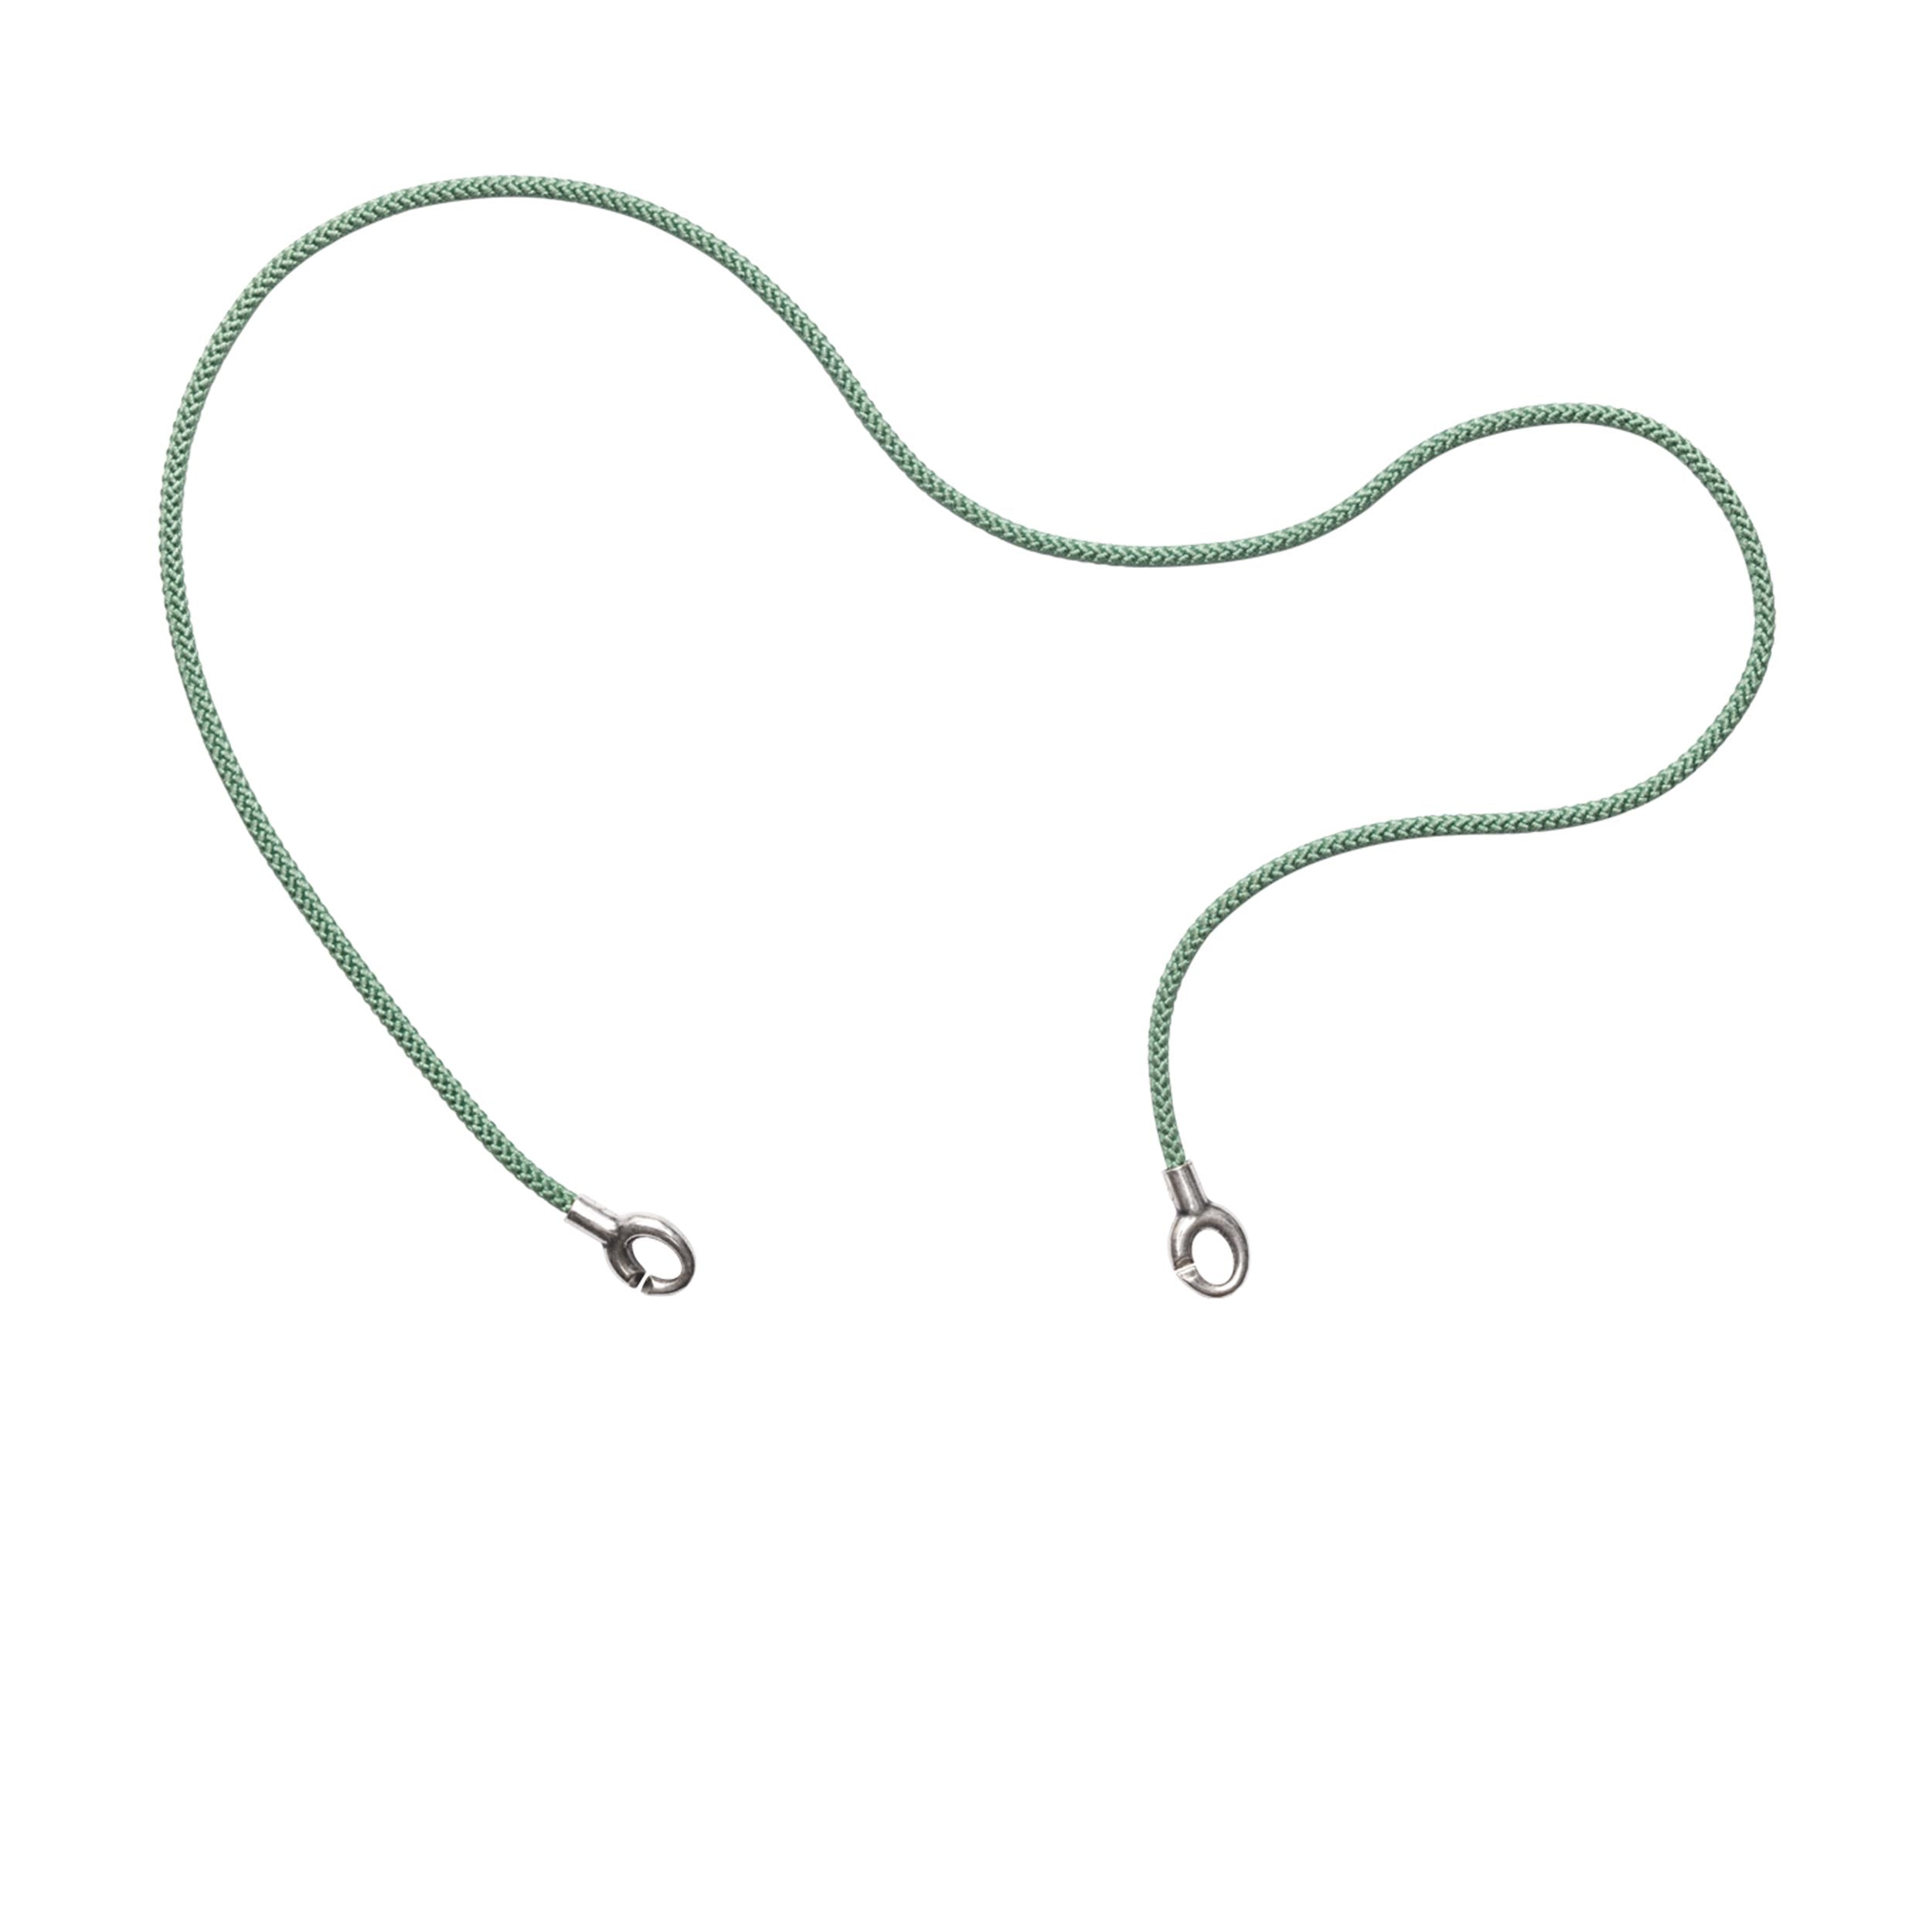 Asian Cord, Soft Green Silver